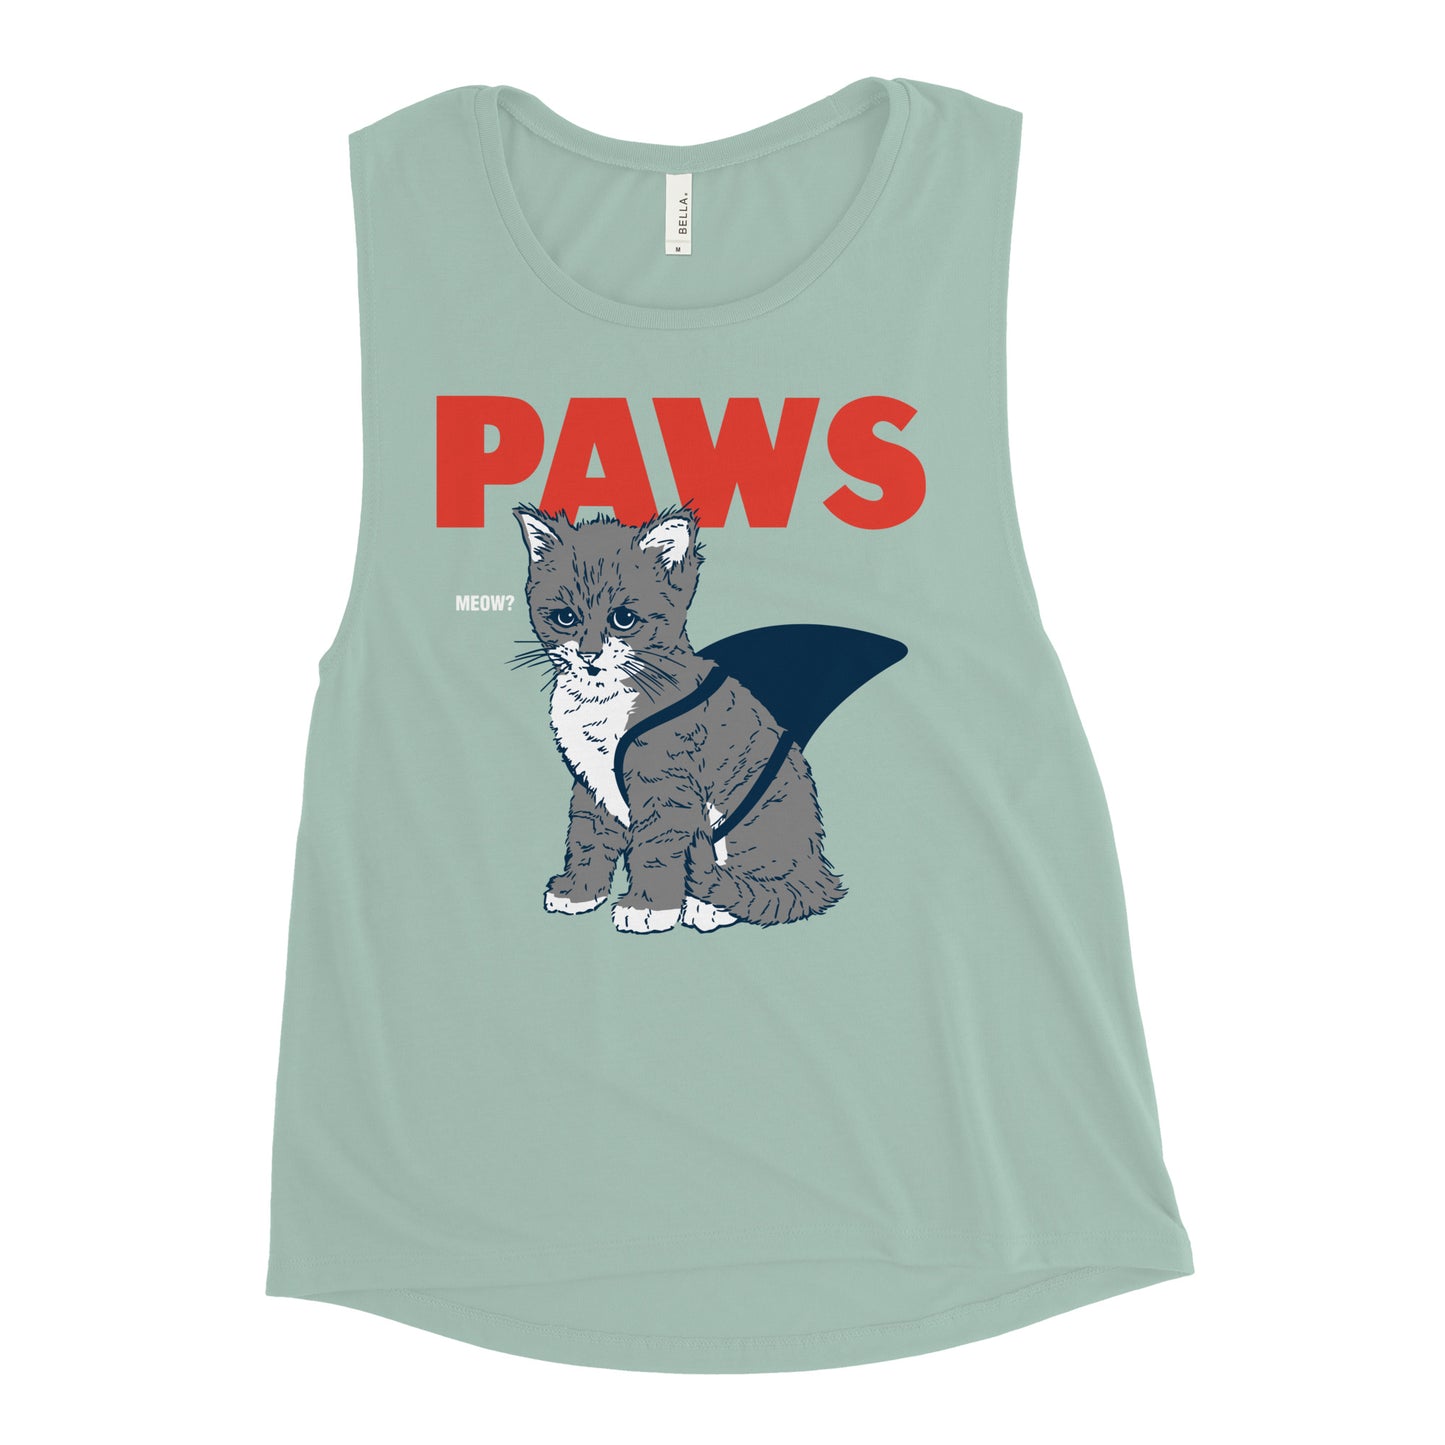 Paws Women's Muscle Tank